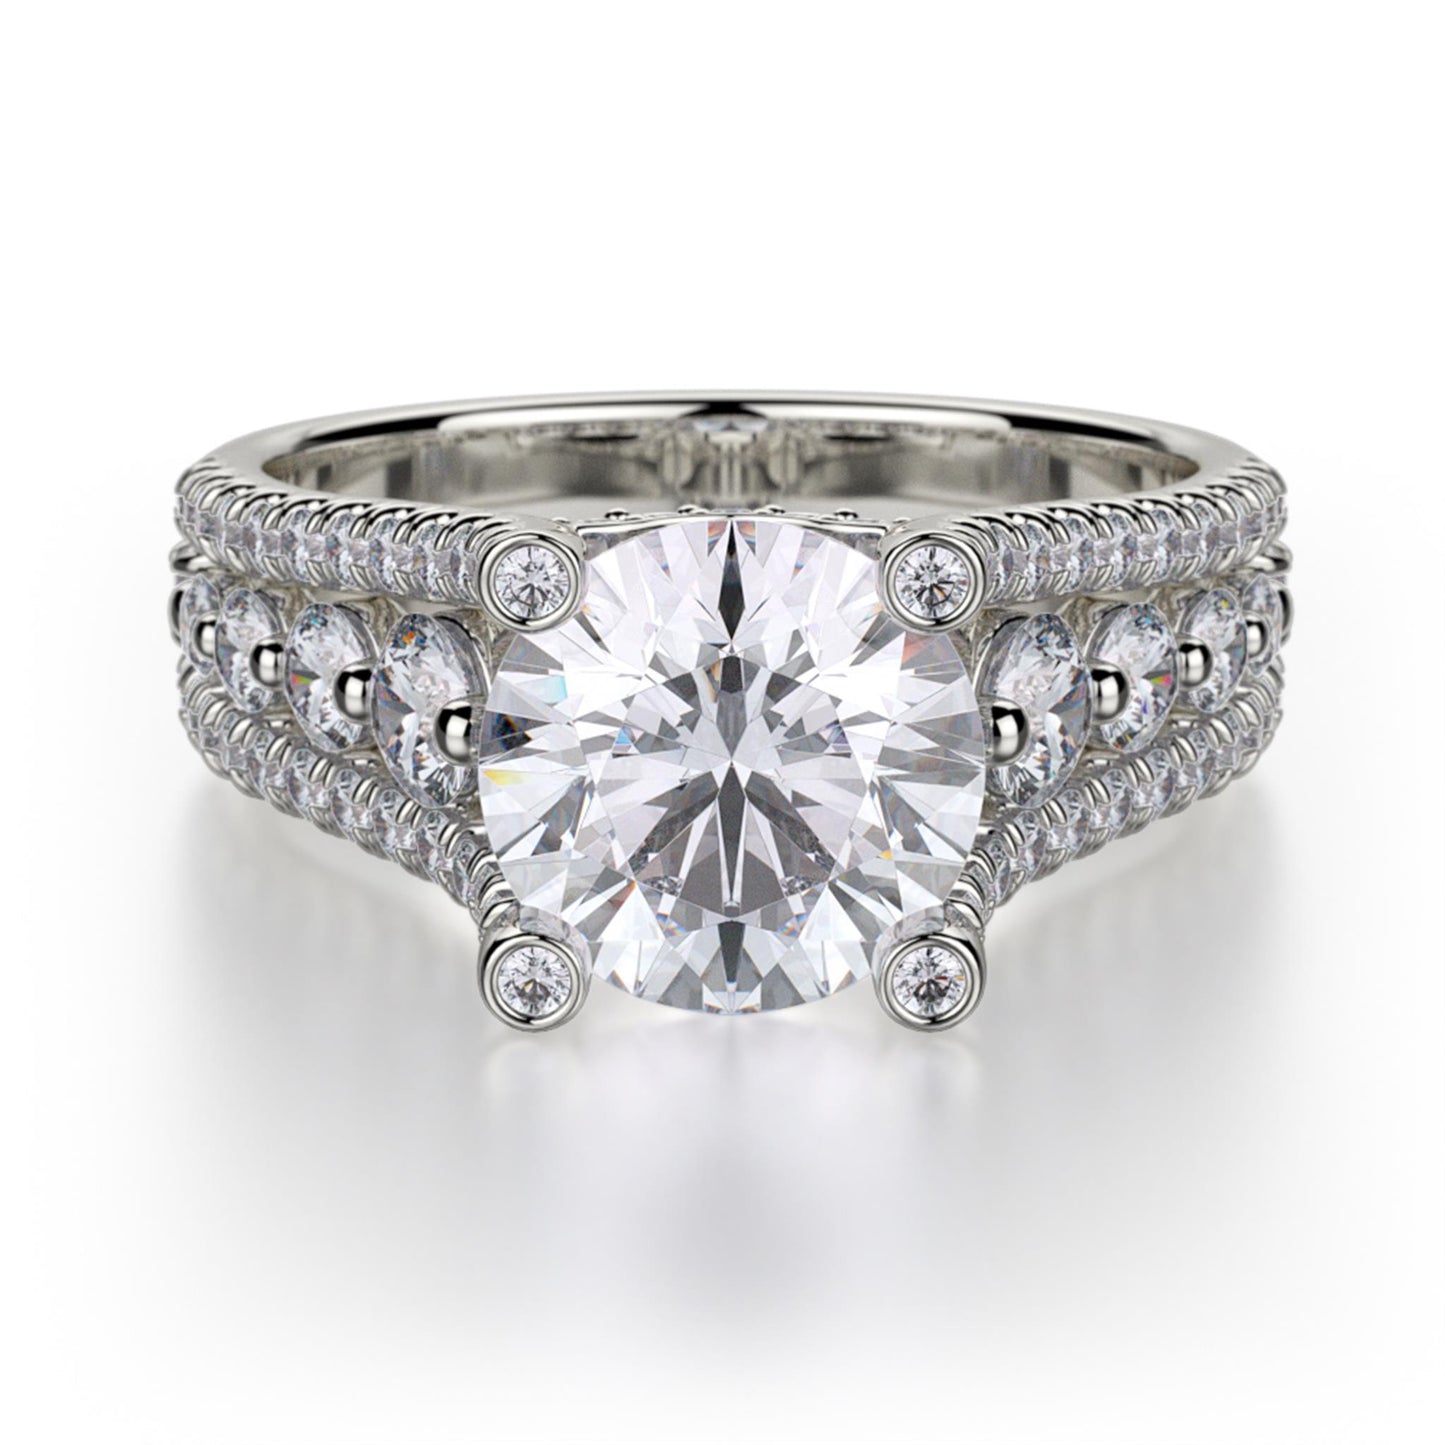 3 Row Shared Prong Semi-Mount Engagement Ring